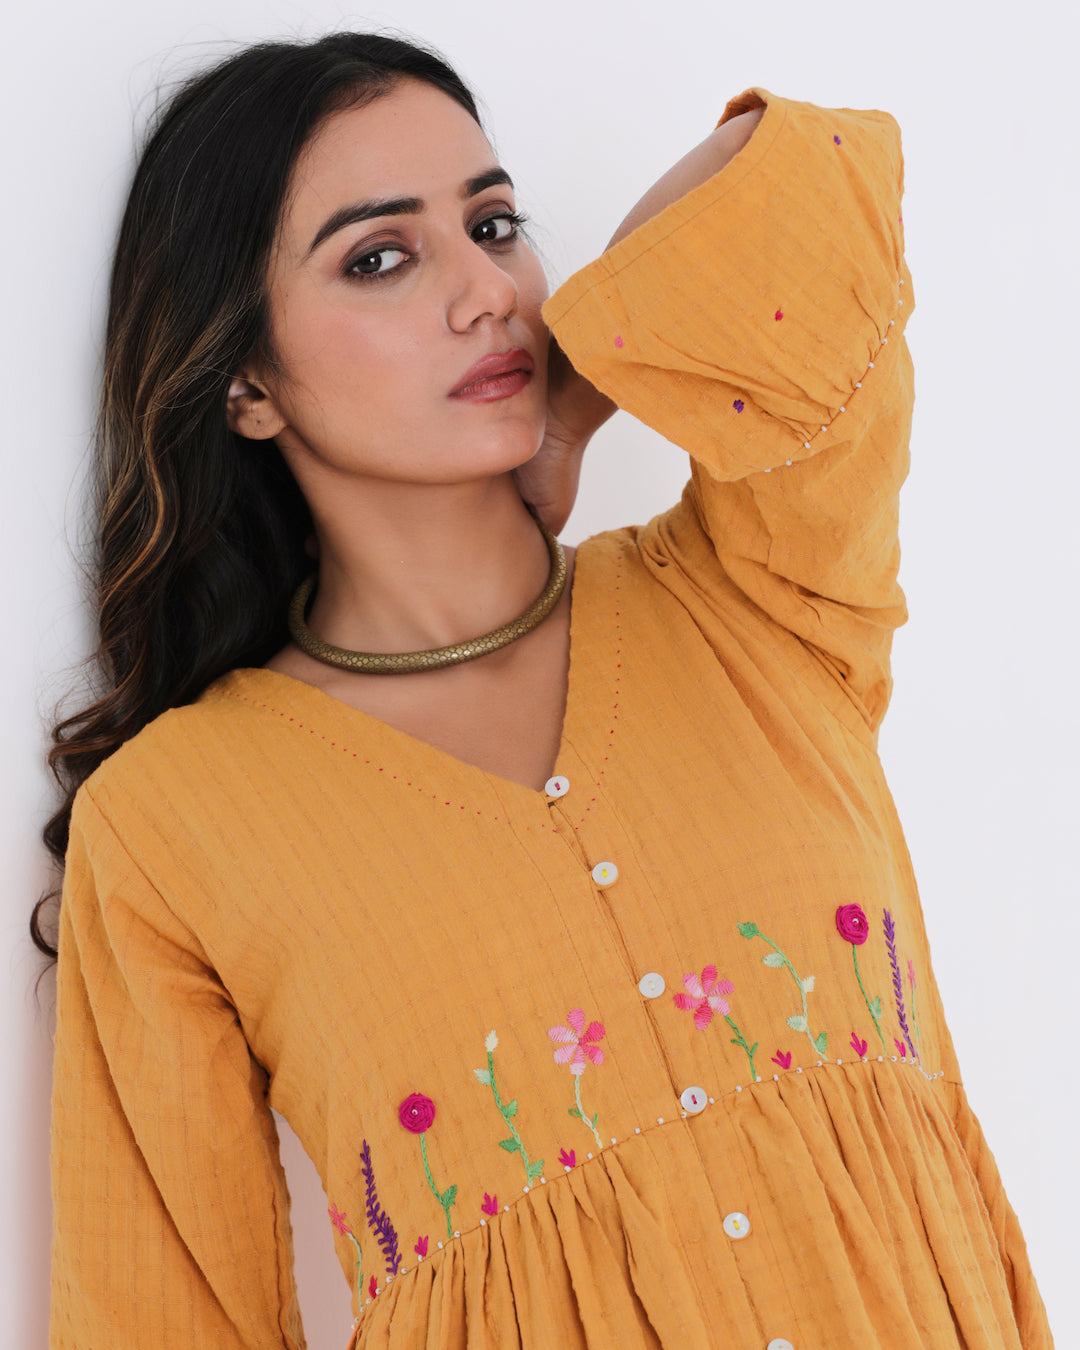 Shop Yellow embroidered dresse for Diwali from Bebaak